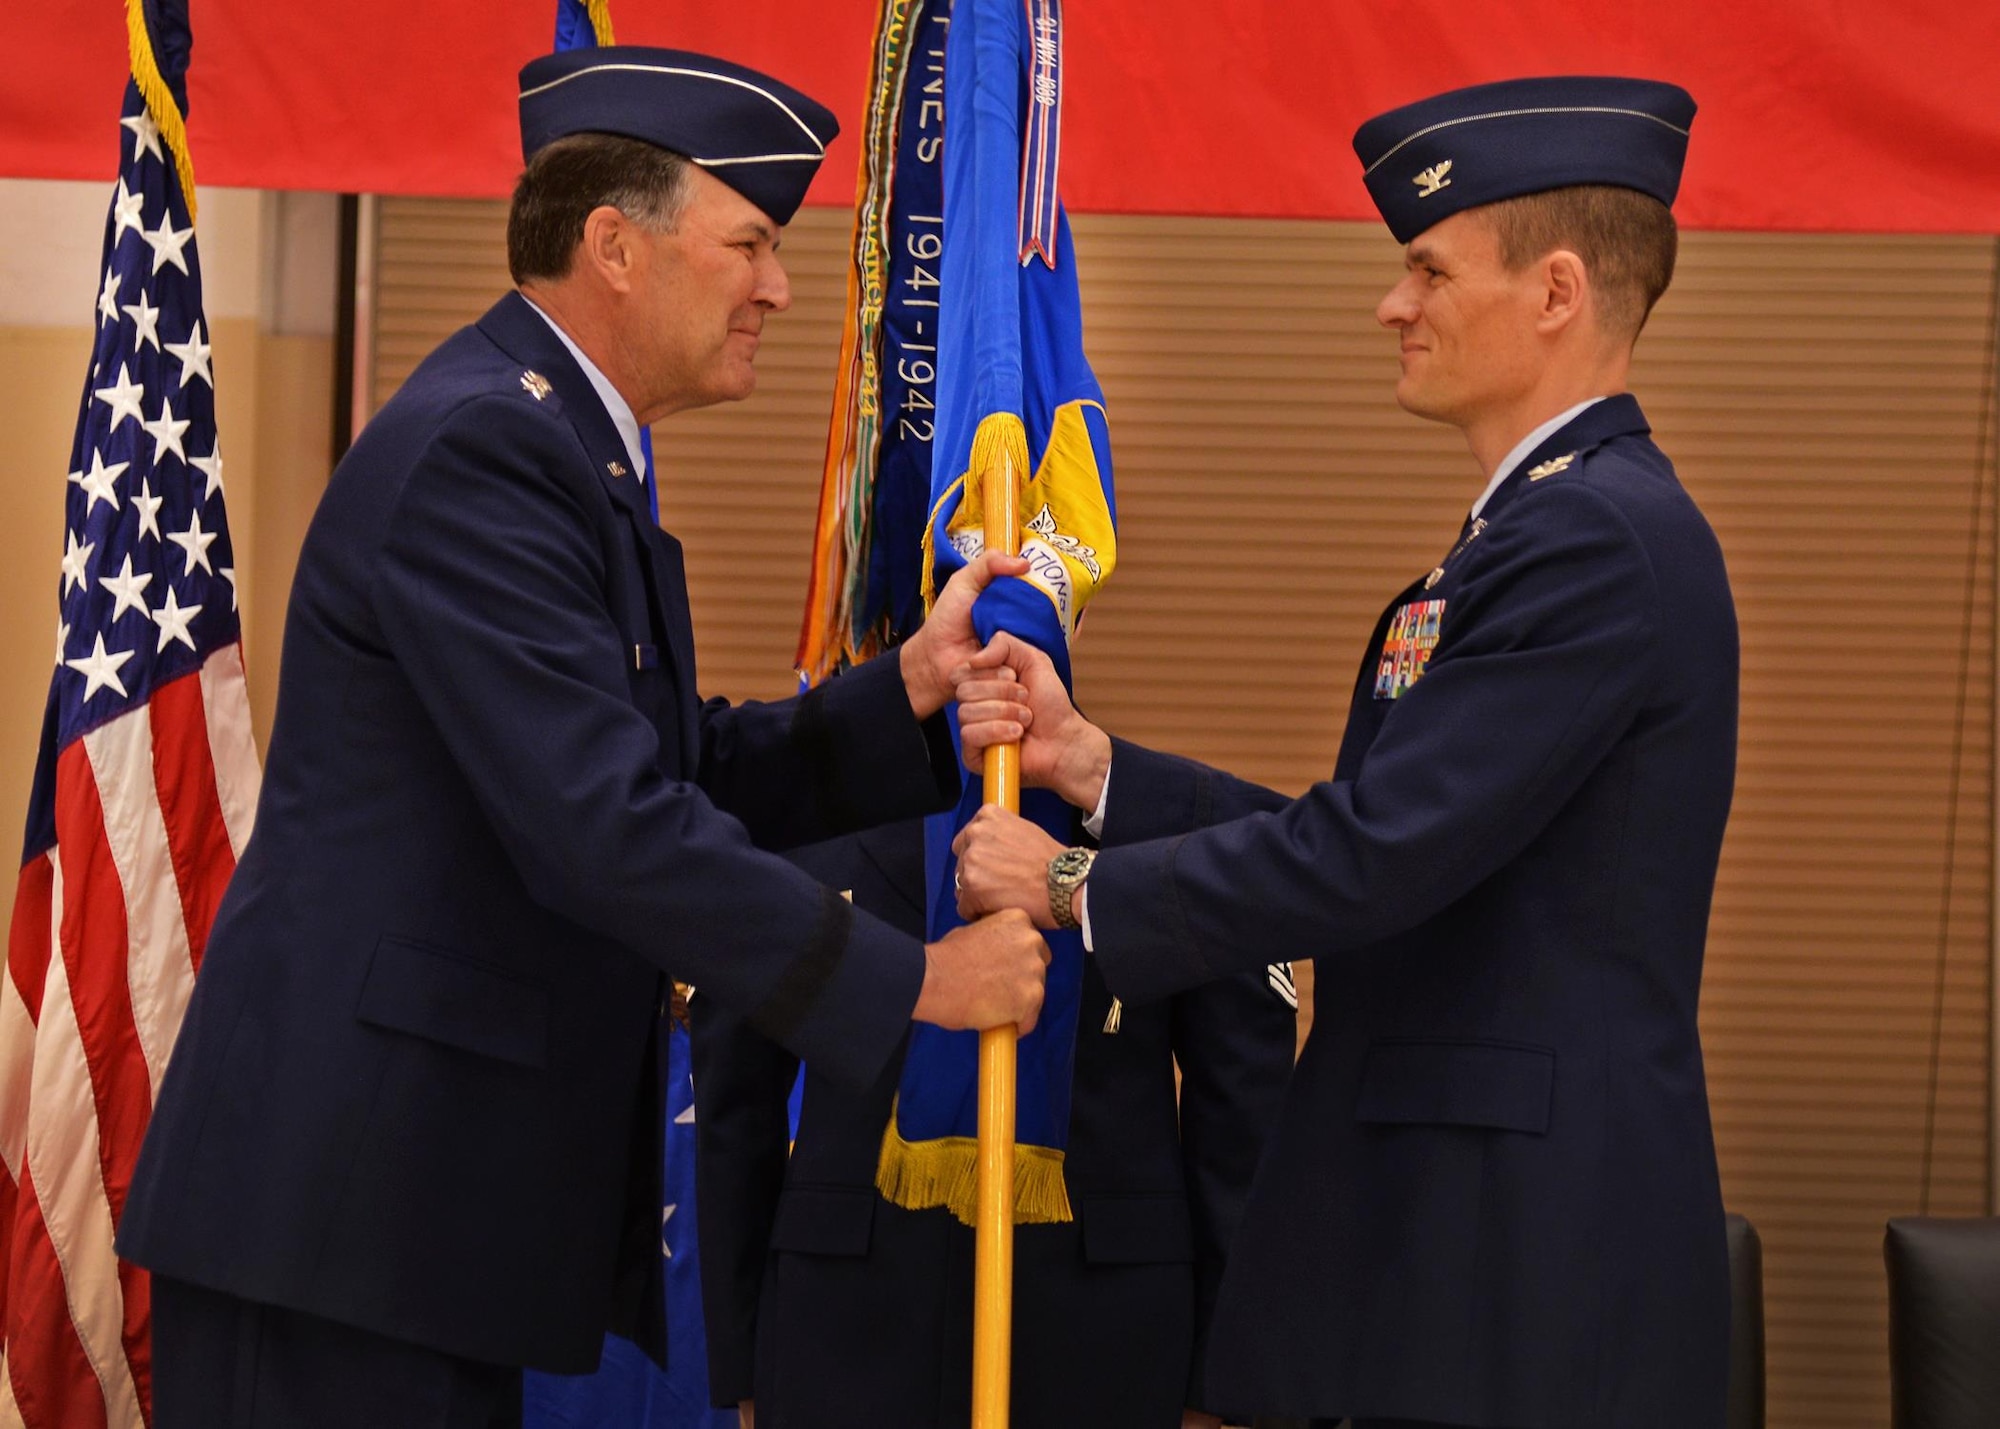 U.S. Air Force Lt. Gen. Bradley Heithold, Commander Air Force Special Operations Command, presents the guidon, representing assumption of command, to Col. Benjamin Maitre, incoming 27th SOW commander, Feb. 17, 2015 at Cannon Air Force Base, N.M. Heithold presided over the ceremony where he conveyed directly to Air Commandos his appreciation for the outstanding, sustained efforts by Team Cannon. (U.S. Air Force photo/Airman 1st Class Chip Slack) 